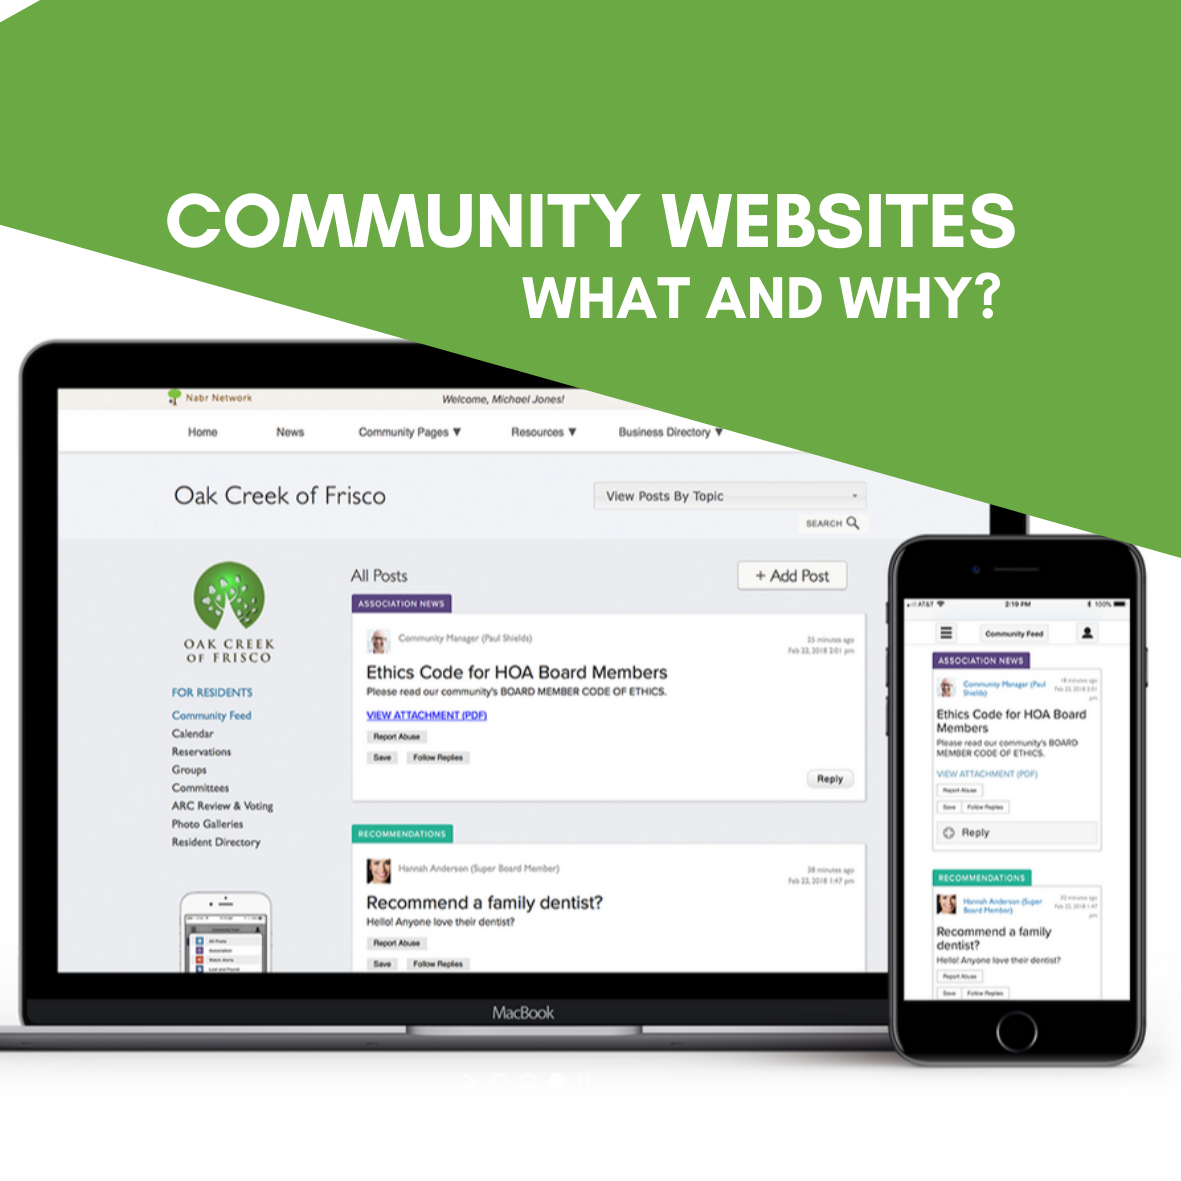 Does your community need a personalized website?